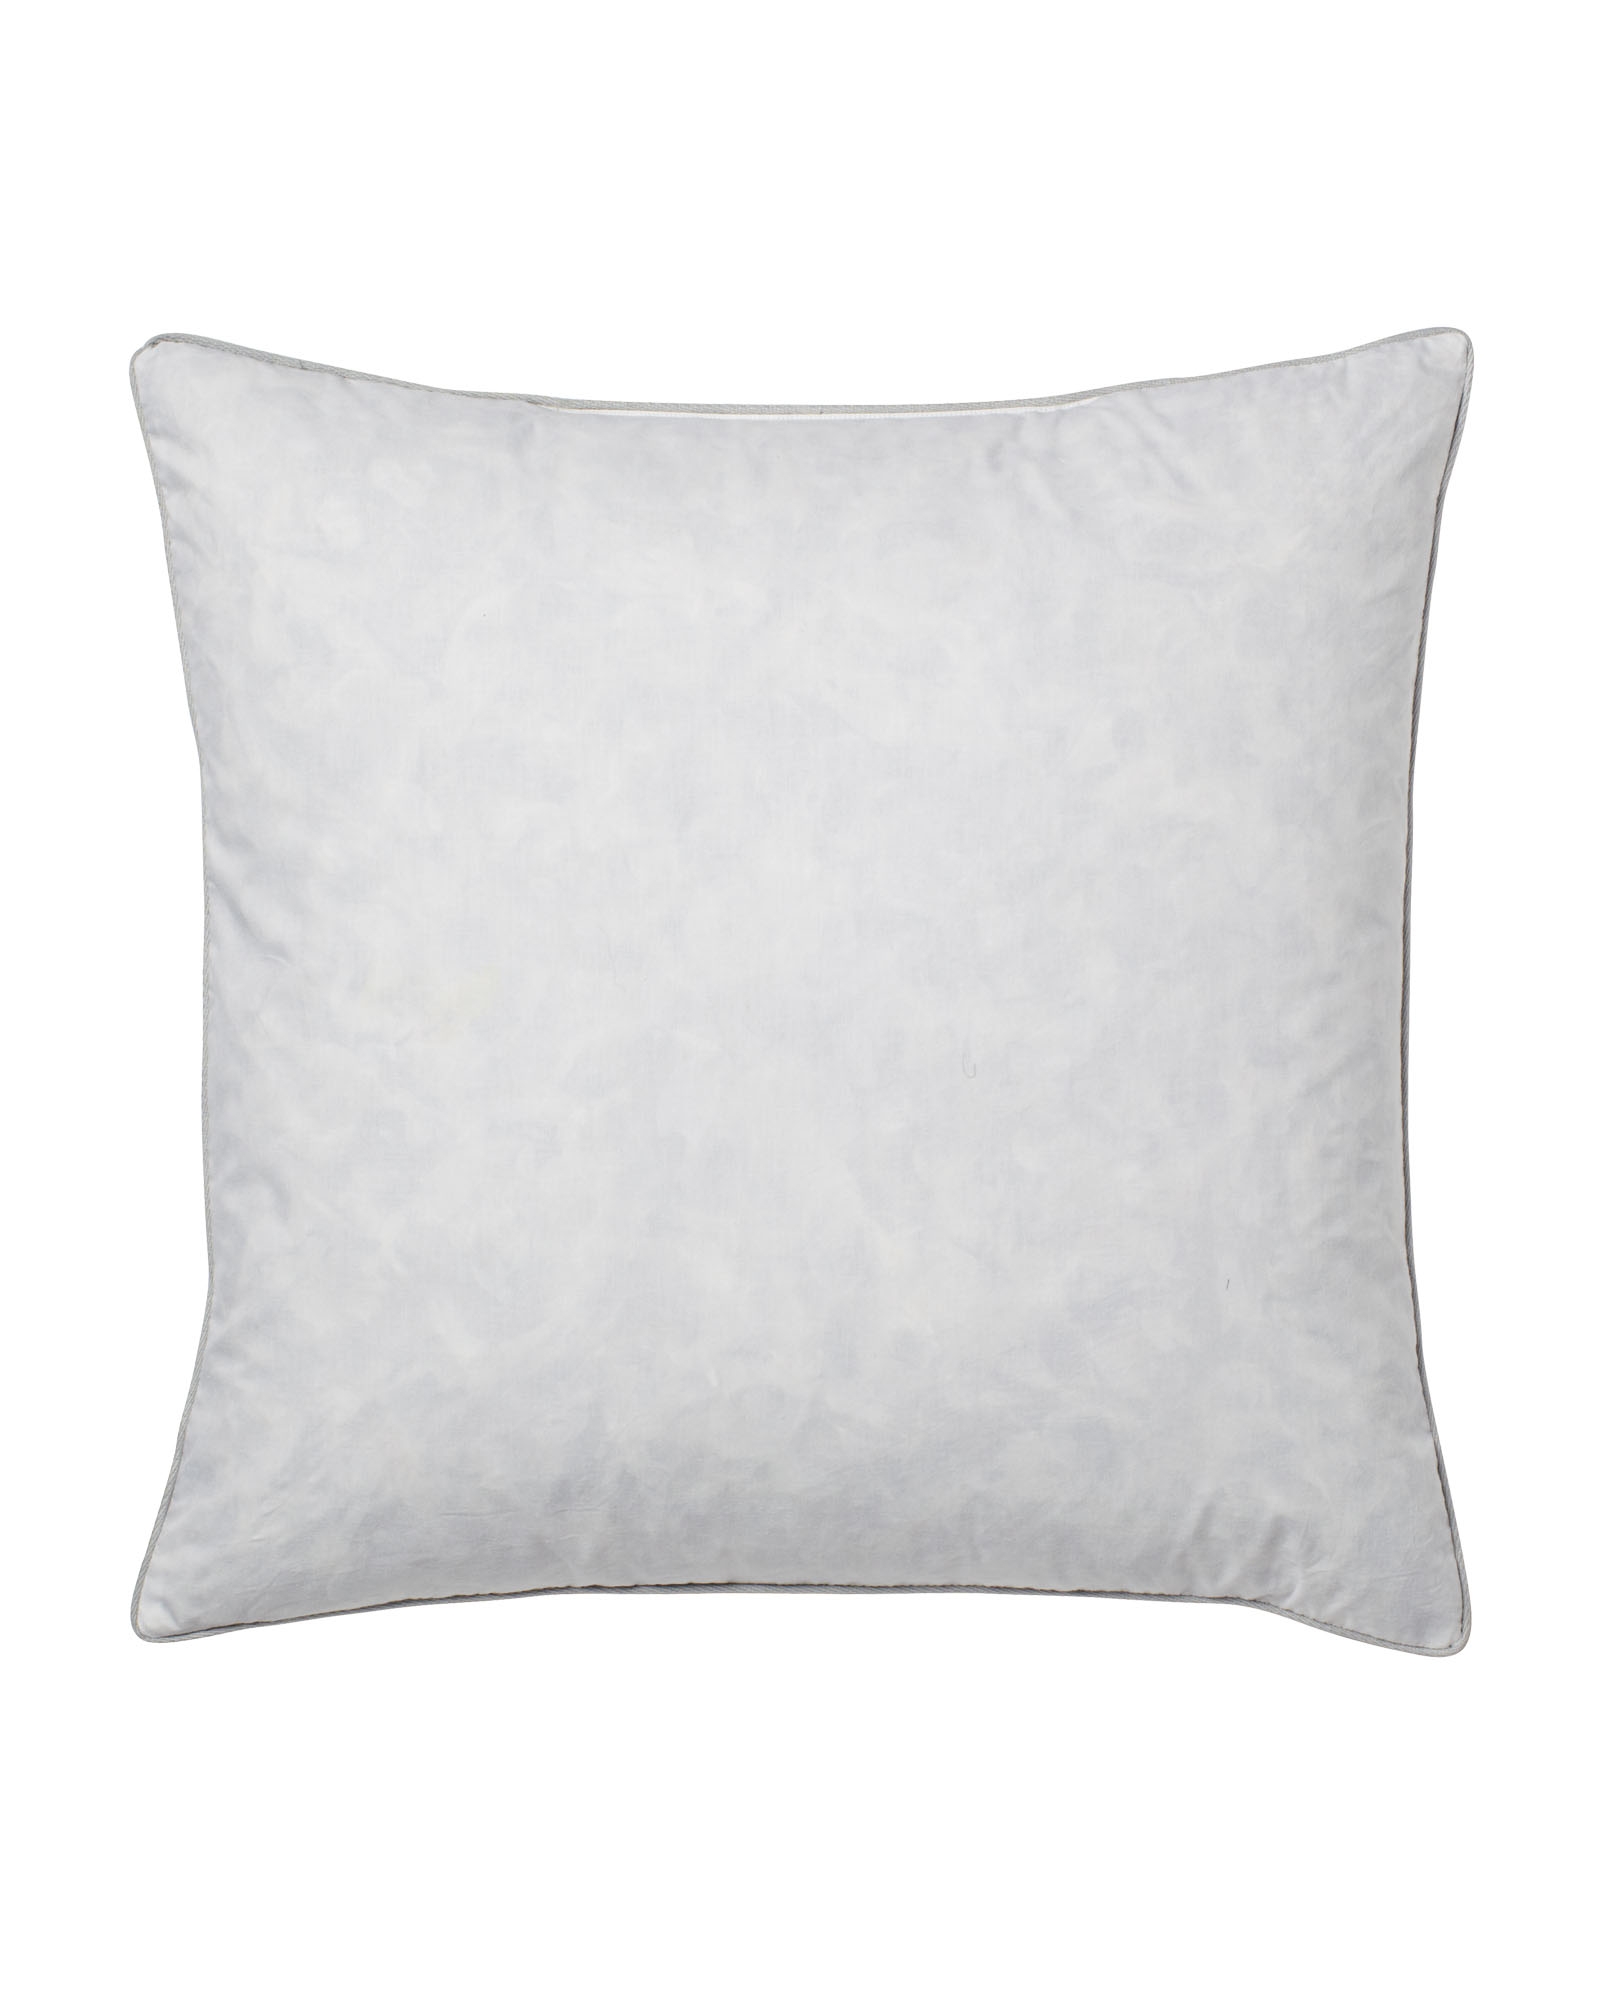 Origami Pillow Cover - Seaglass- 20"SQ  - Inserts sold separately. - Image 0